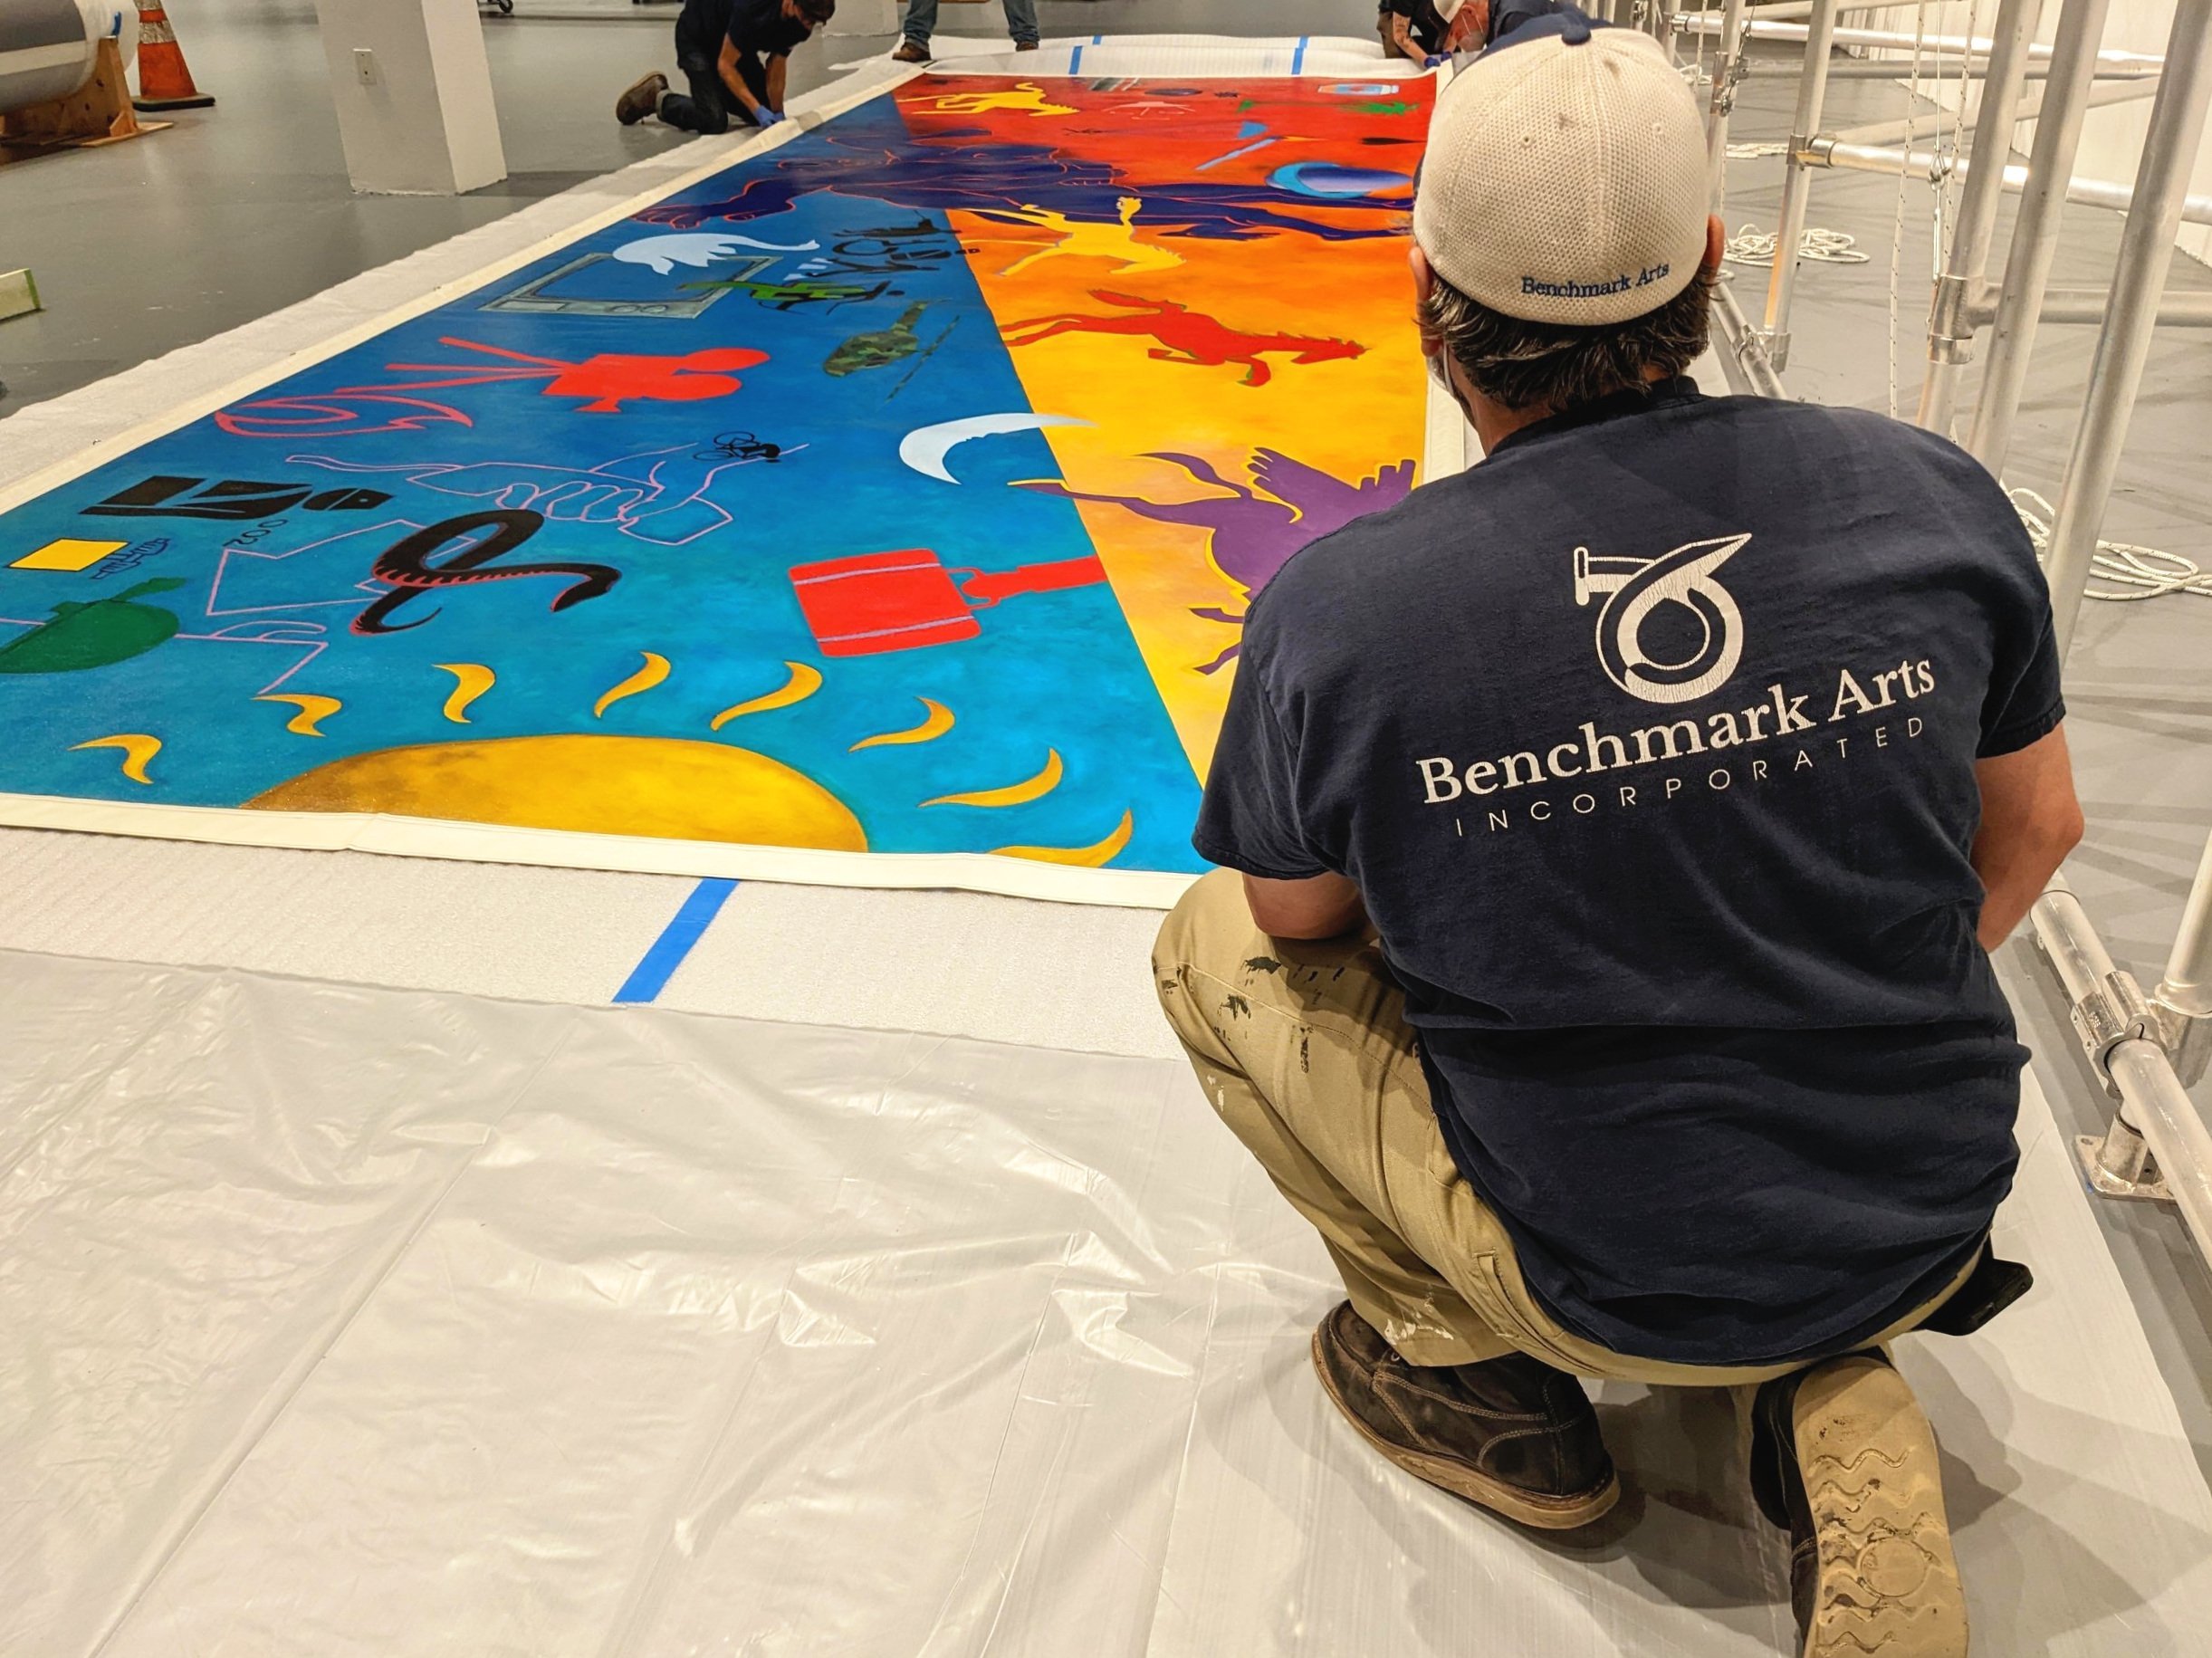   Bringing creativity to life   Benchmark Arts provides concept development, specialty fabrication, and installation services to artists, cultural institutions, and entertainment companies. 